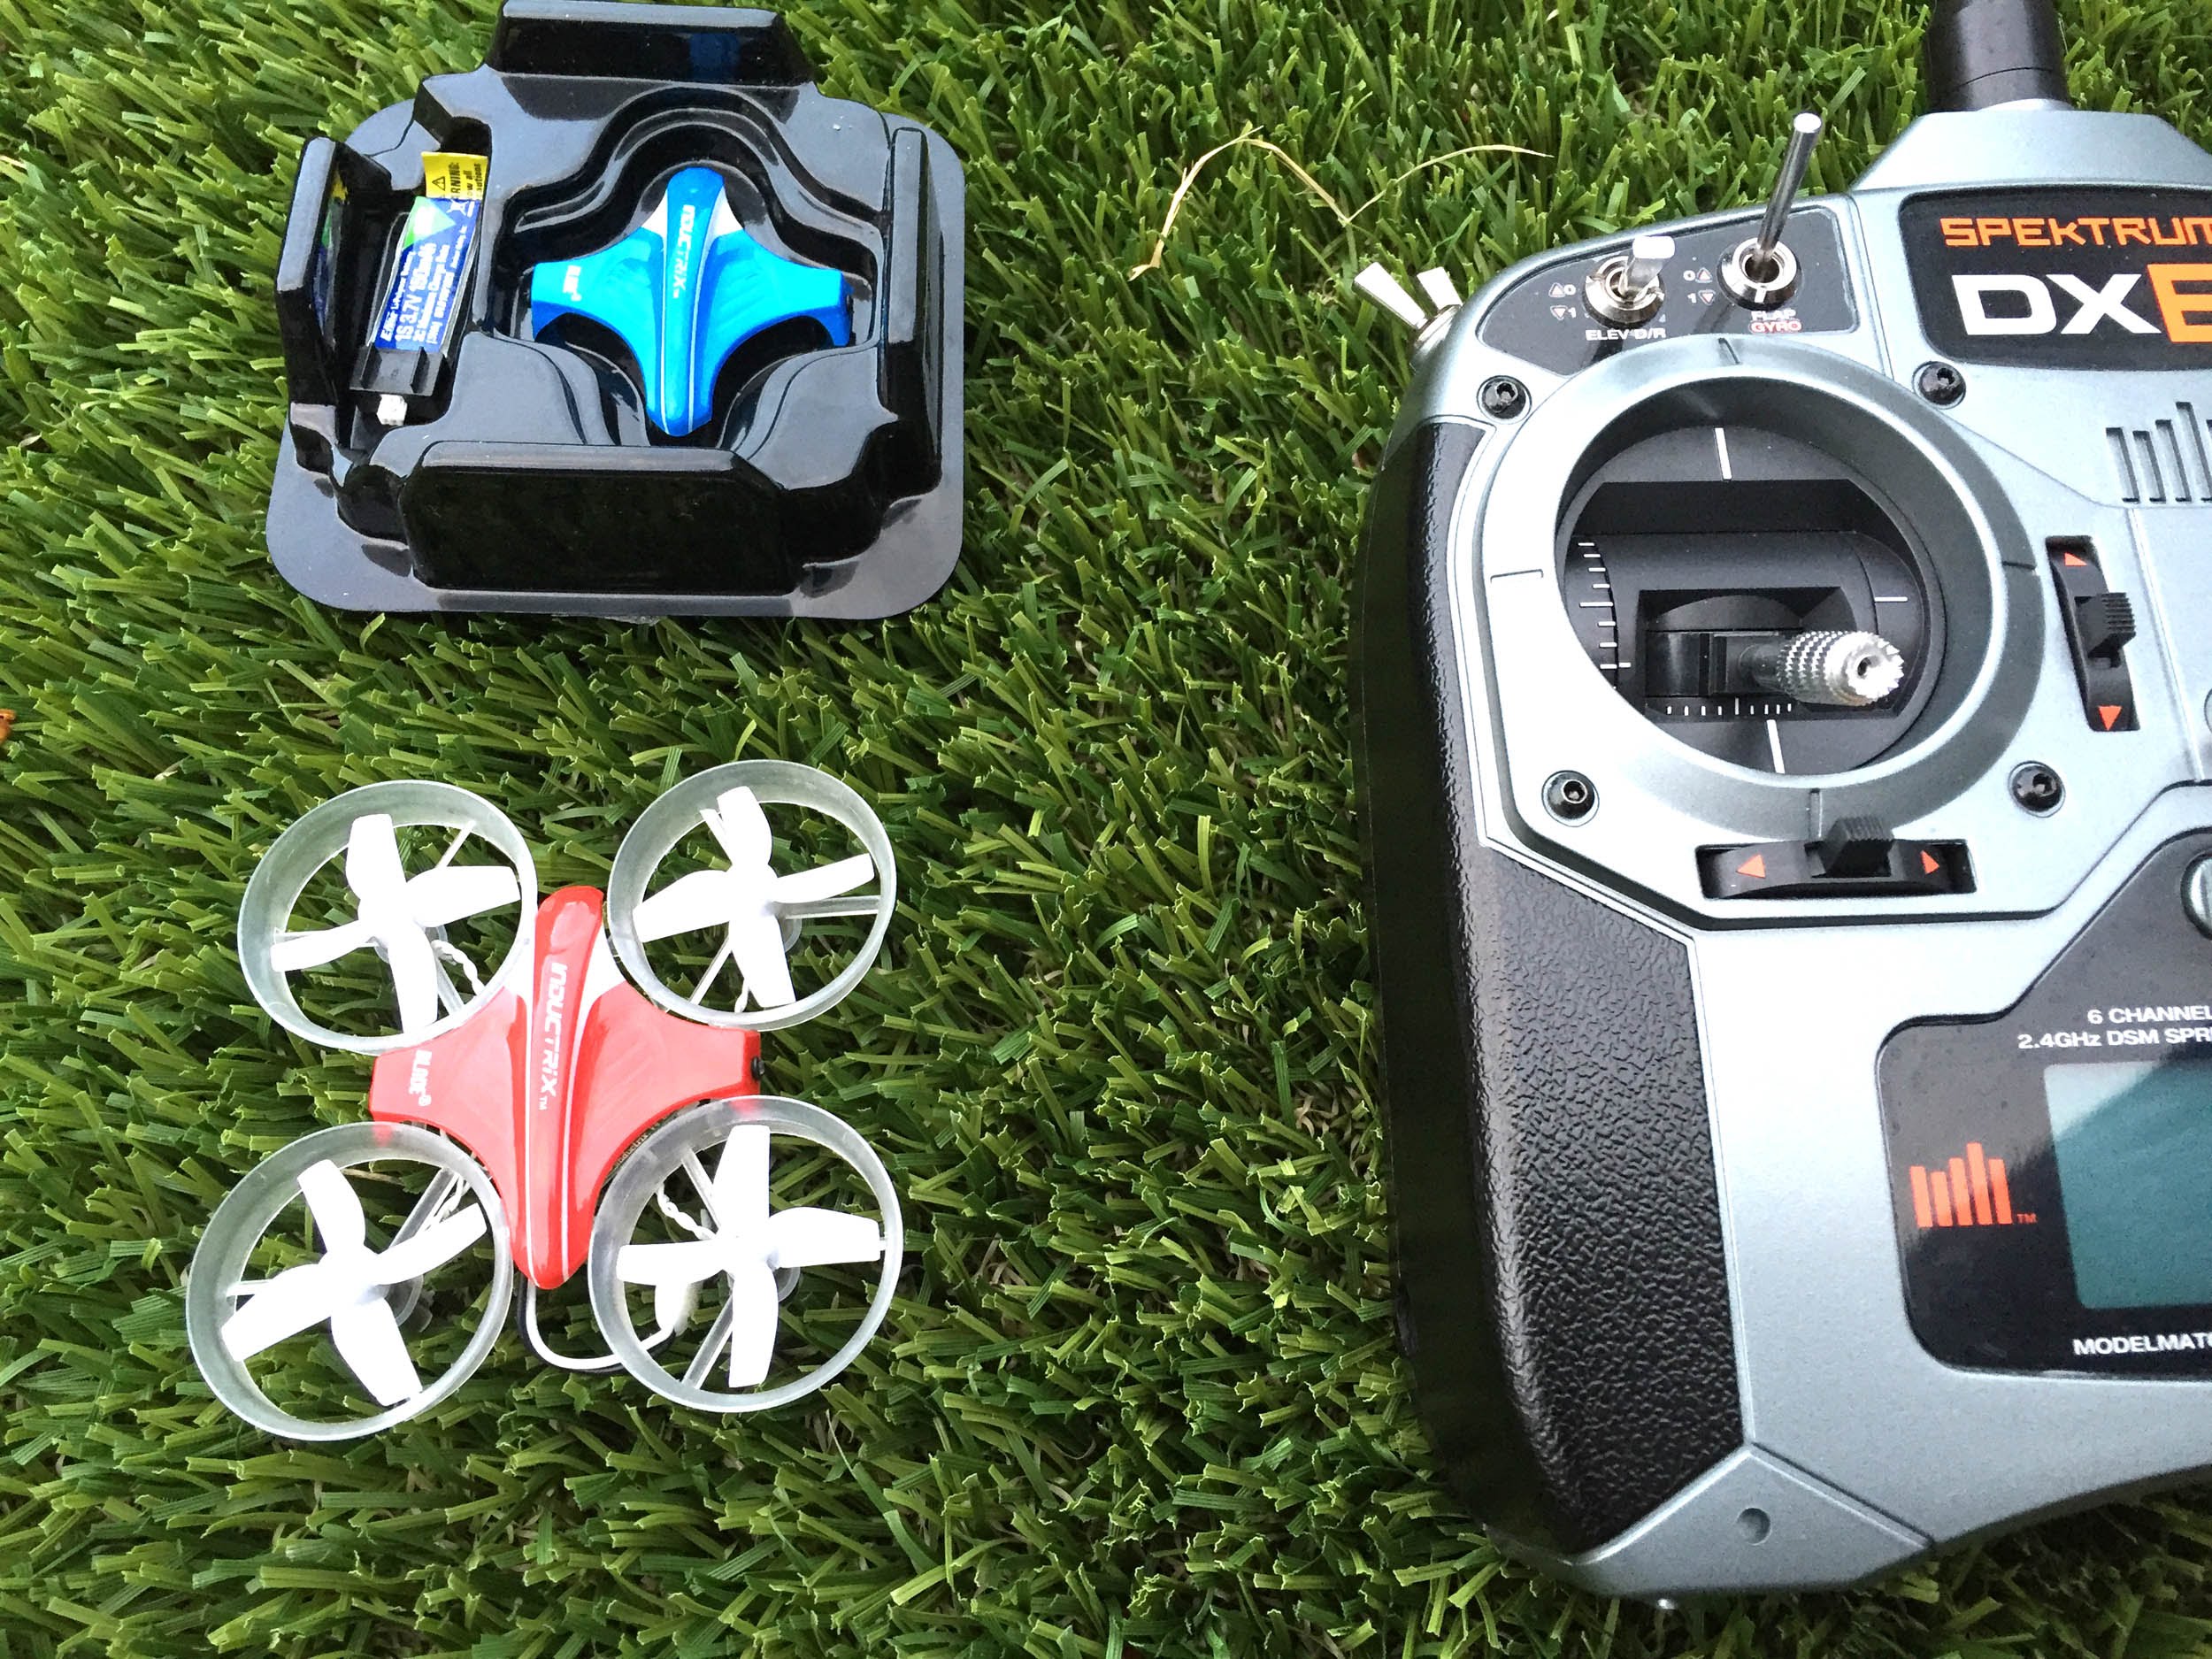 Blade Inductrix Quadcopter Unboxing and Review